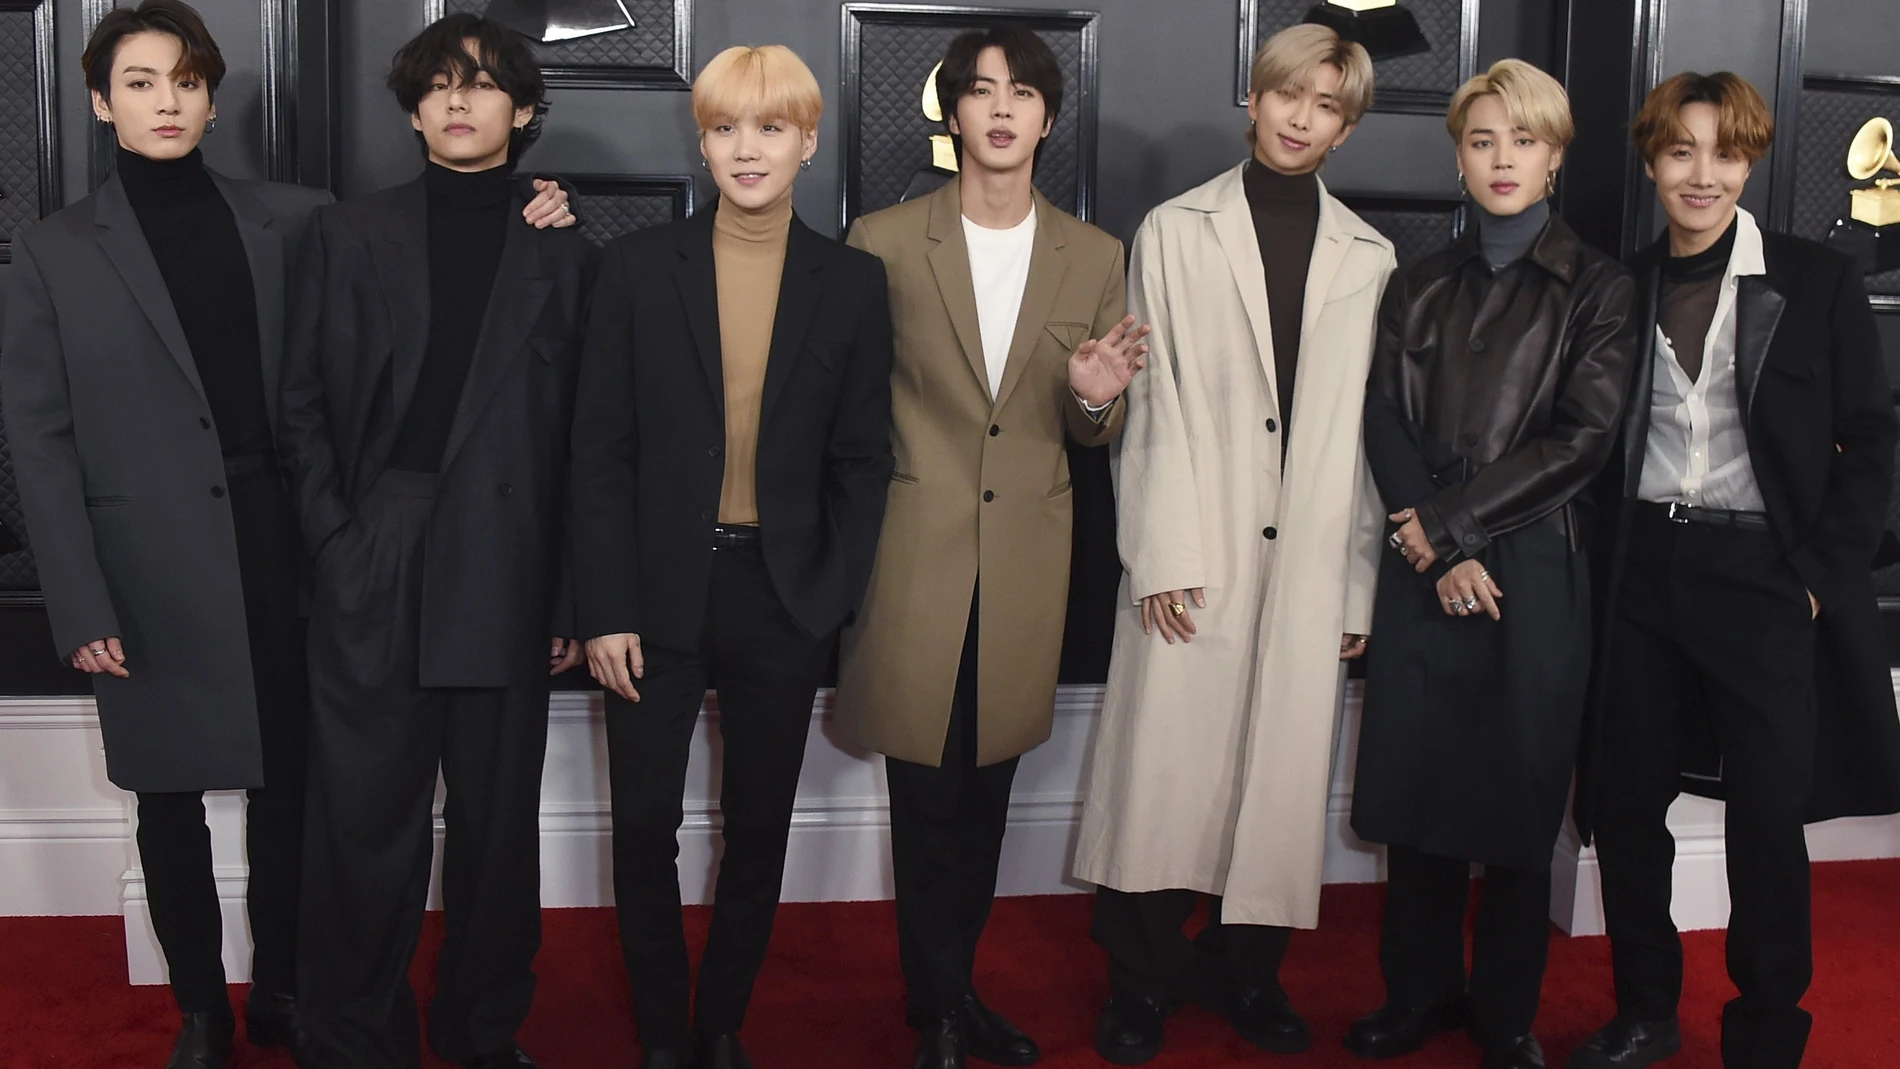 FILE - BTS arrives at the 62nd annual Grammy Awards in Los Angeles on Jan. 26, 2020. The popular band will perfrom at this month's Grammy Awards. (Photo by Jordan Strauss/Invision/AP, File)